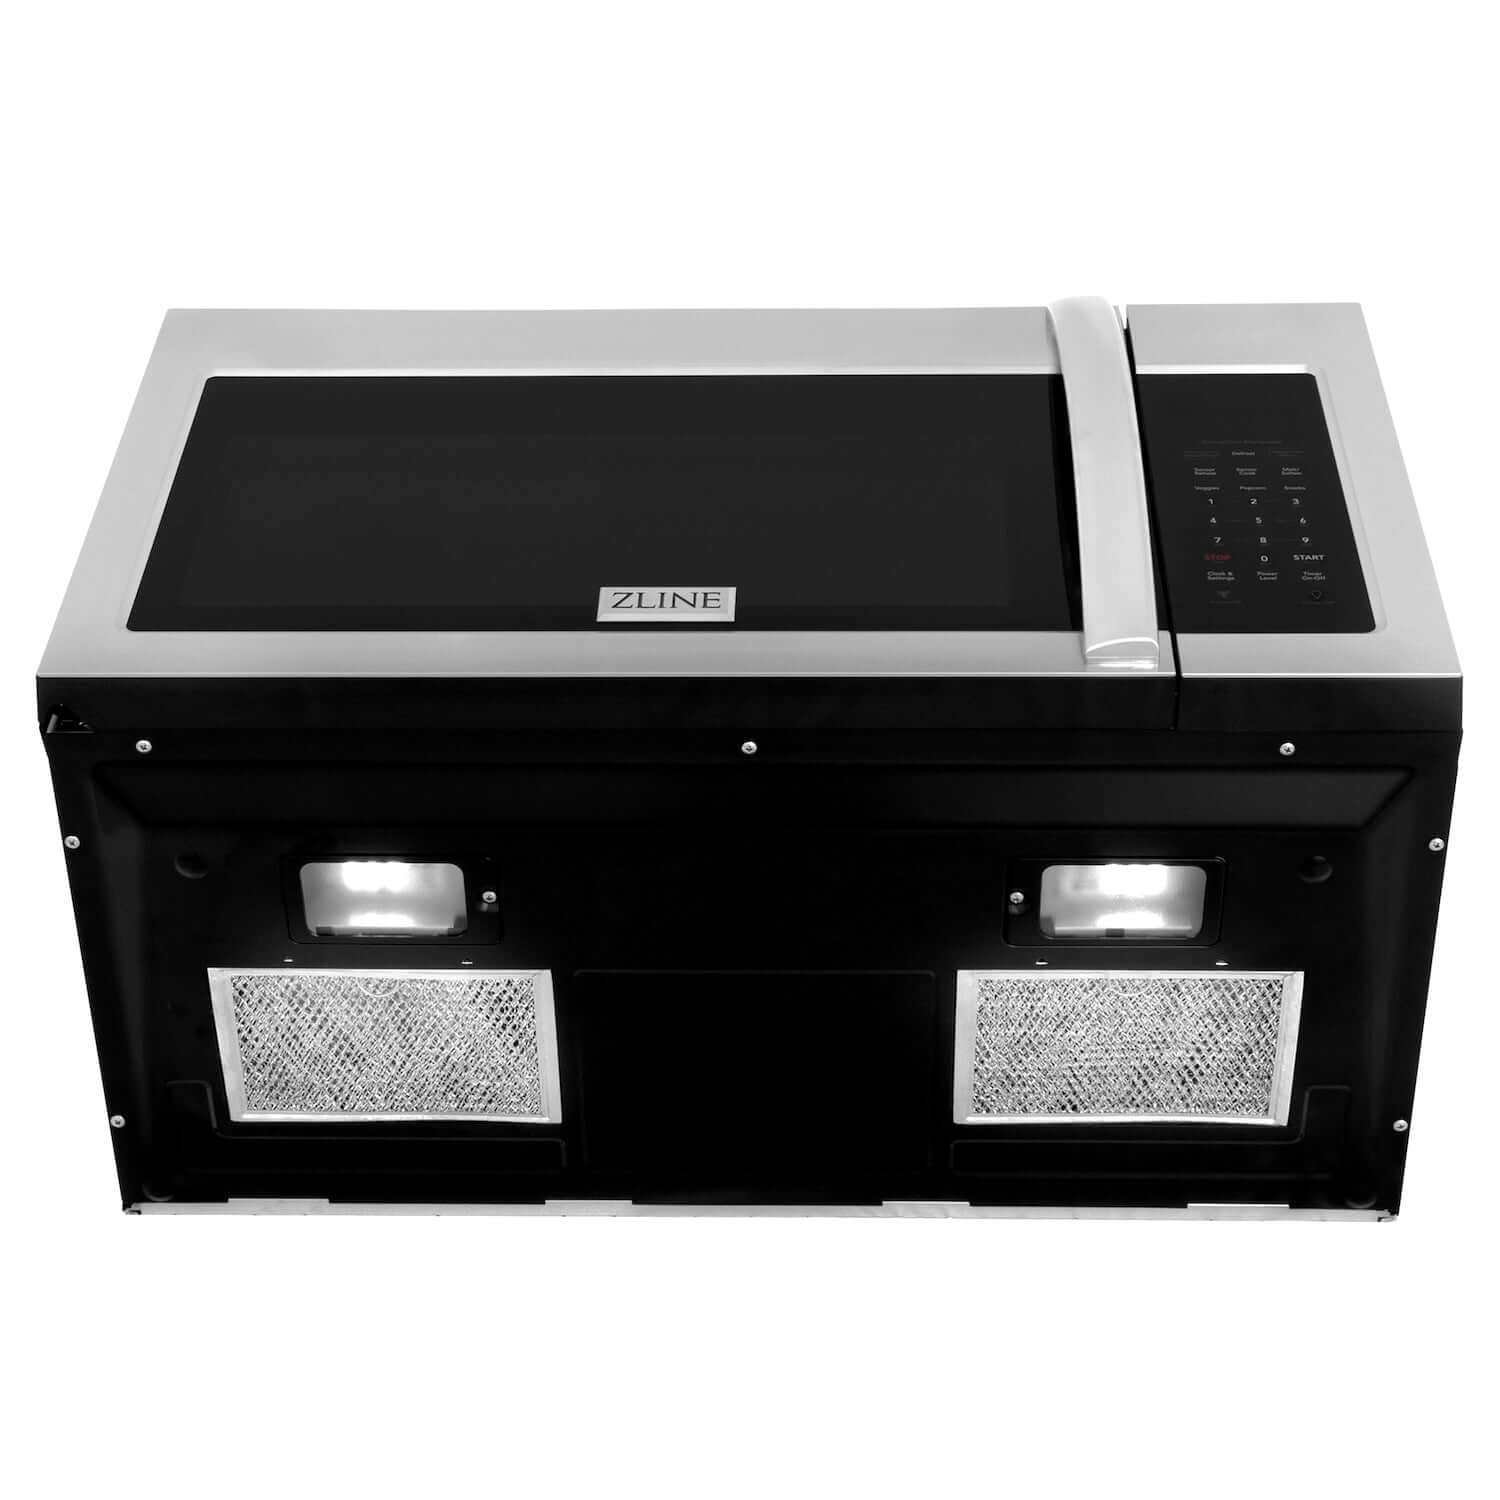 LED cooktop lighting and ventilation on ZLINE 30" Over the Range Microwave from underneath.